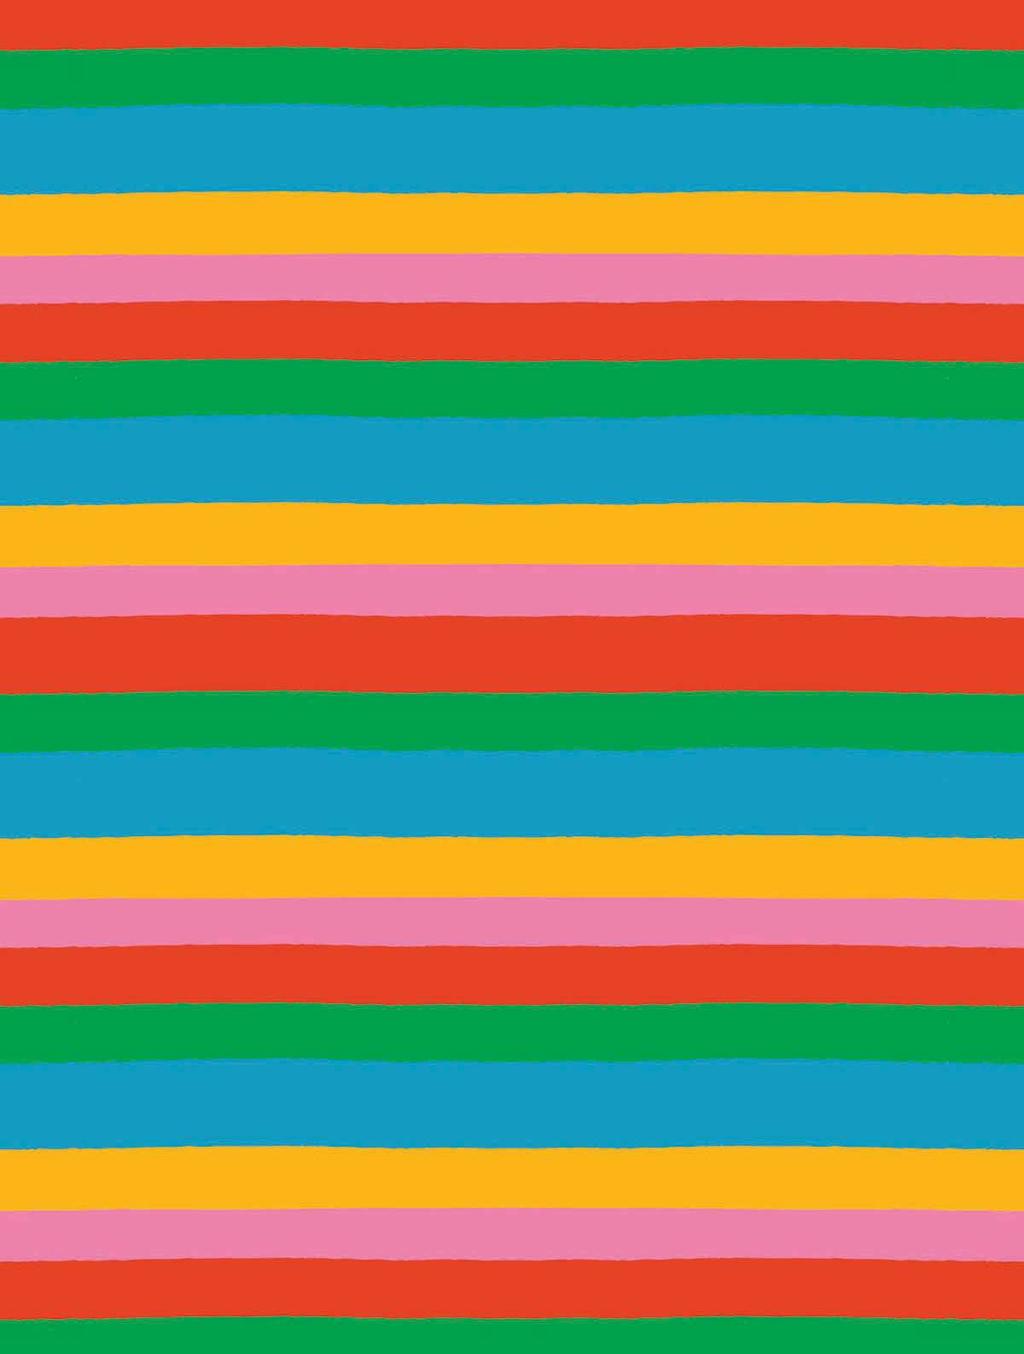 BACK- GROUND This year we have created a multi-coloured stripe background.